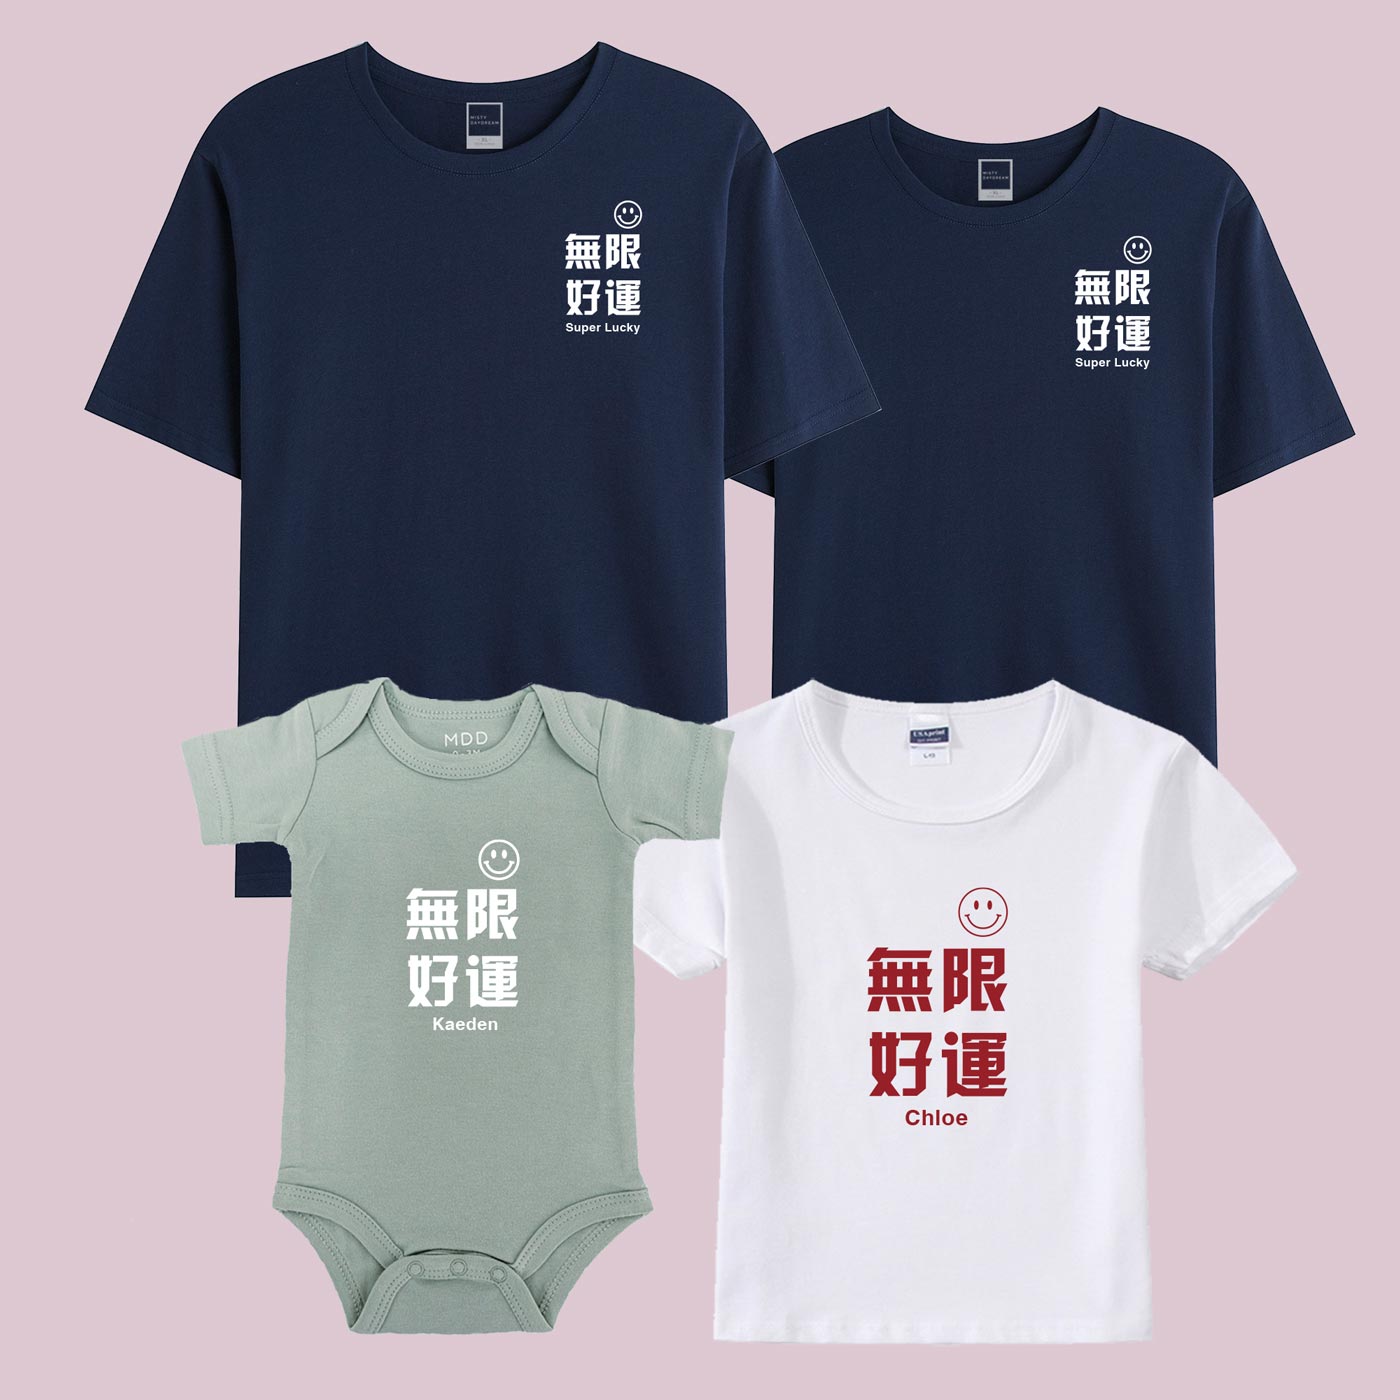 CNY family outfit super lucky design with custom text